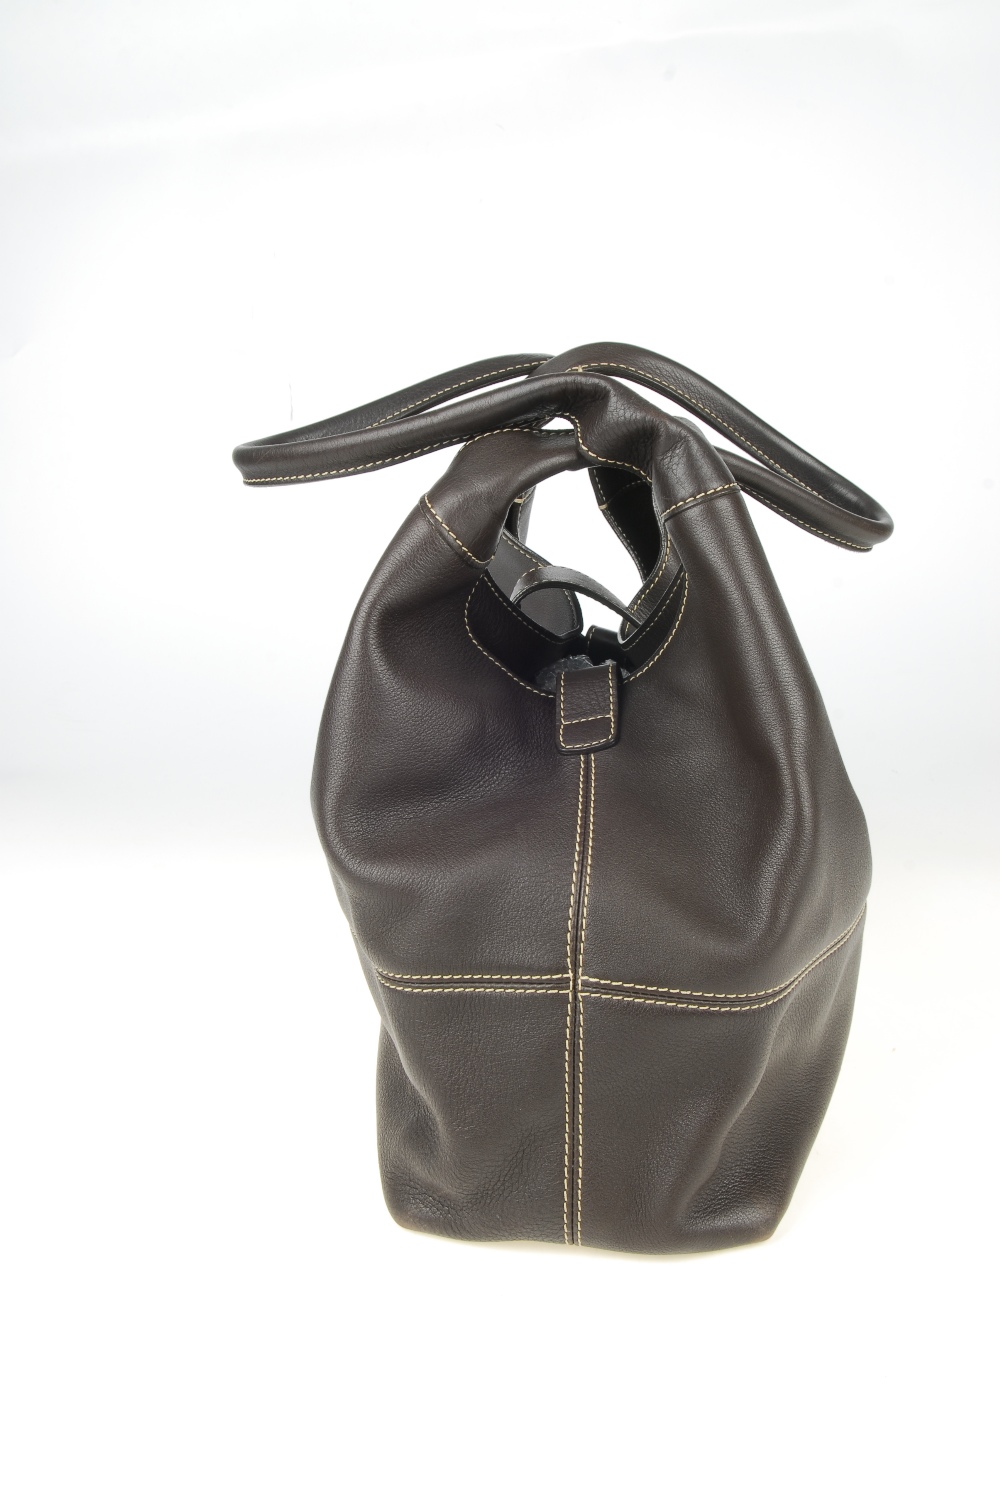 LORO PIANA - a brown leather hobo handbag. Designed from lightly grained dark brown leather with - Image 5 of 12